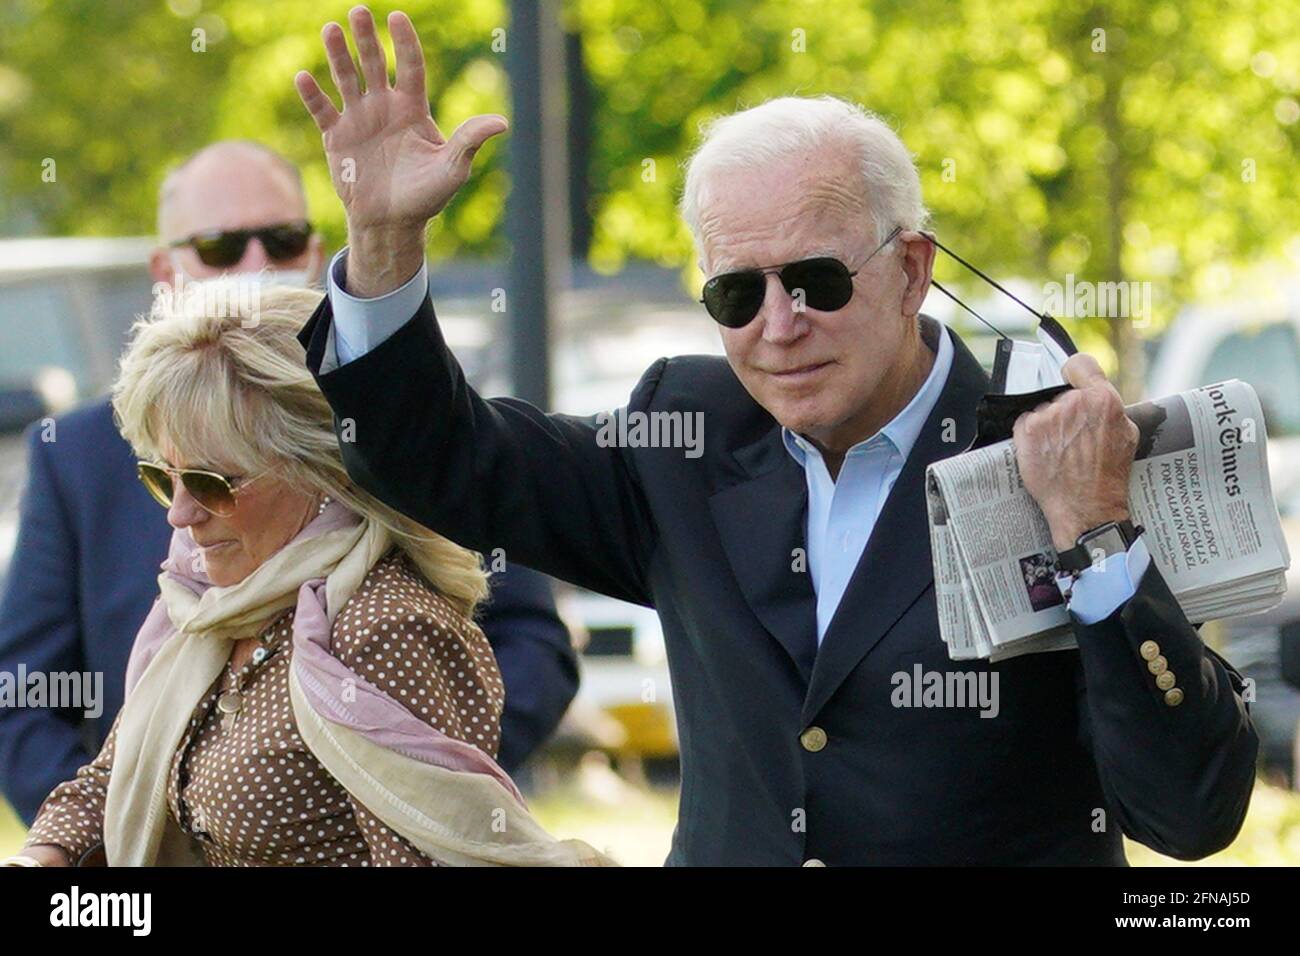 U.S. President Joe Biden waves as he removing his face mask while walking with first lady Jill Biden as they depart from the White House en route to Wilmington, Delaware from the Ellipse in Washington, U.S., May 15, 2021. REUTERS/Yuri Gripas Stock Photo